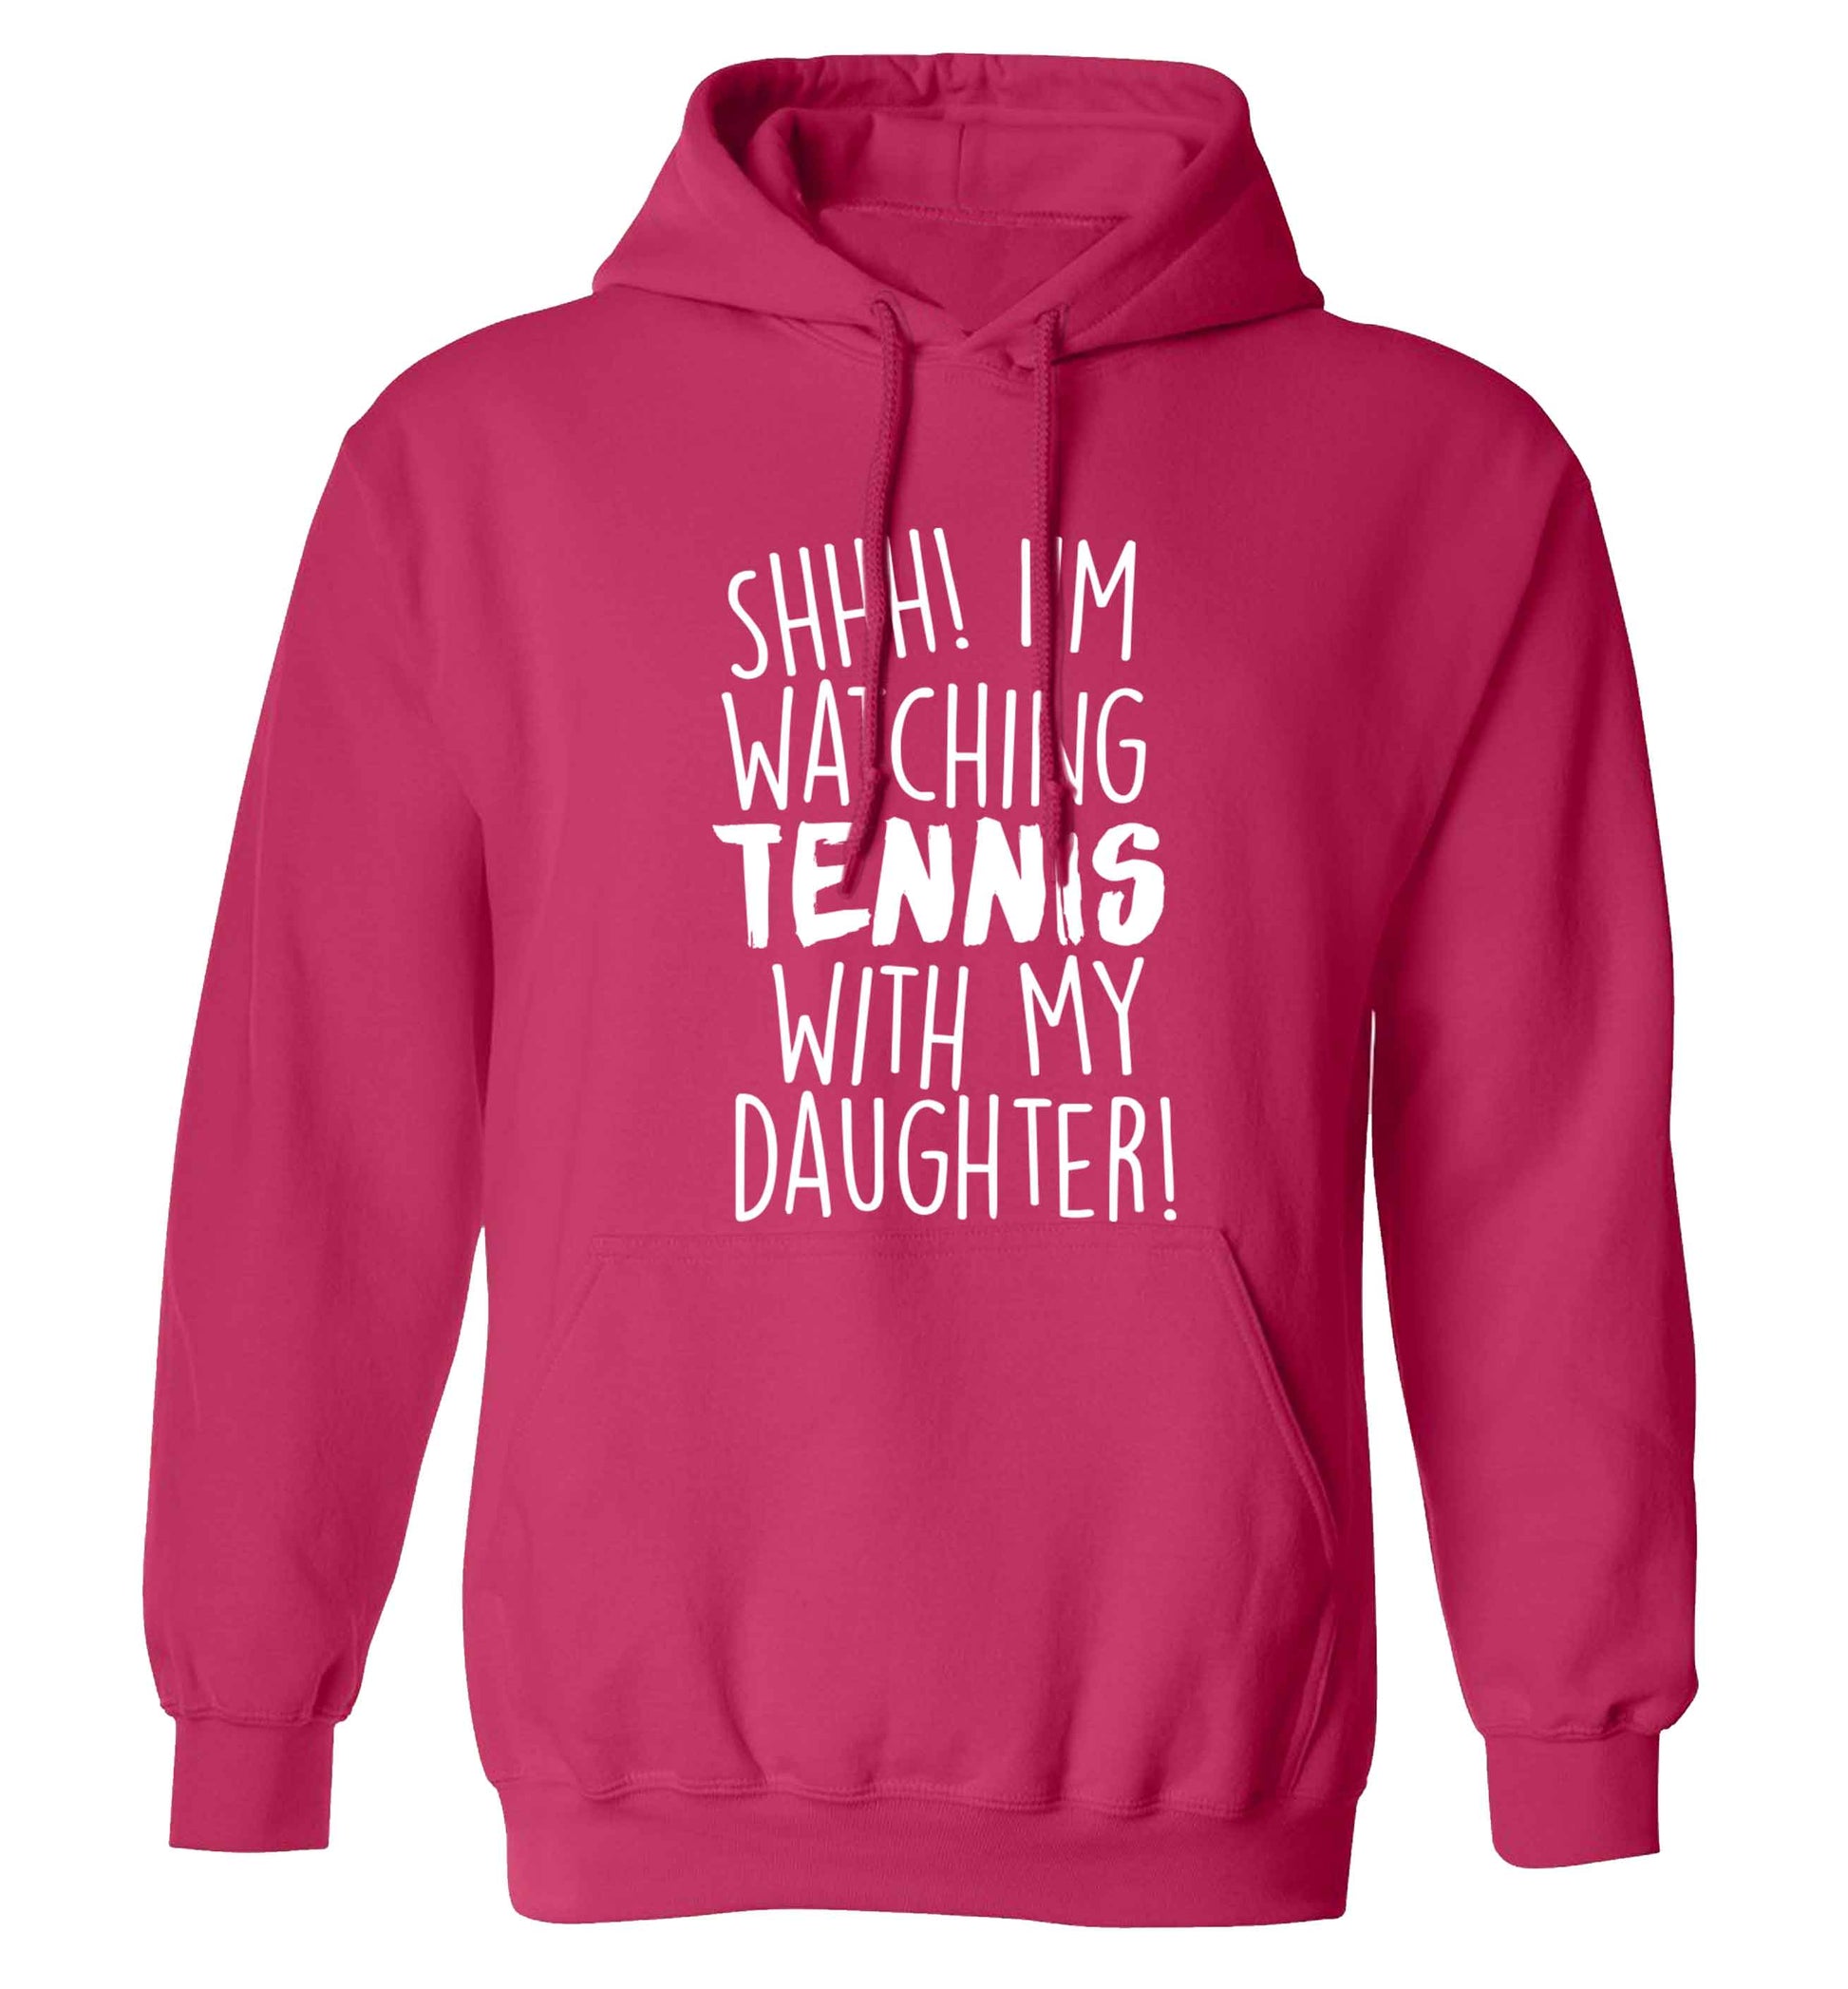 Shh! I'm watching tennis with my daughter! adults unisex pink hoodie 2XL